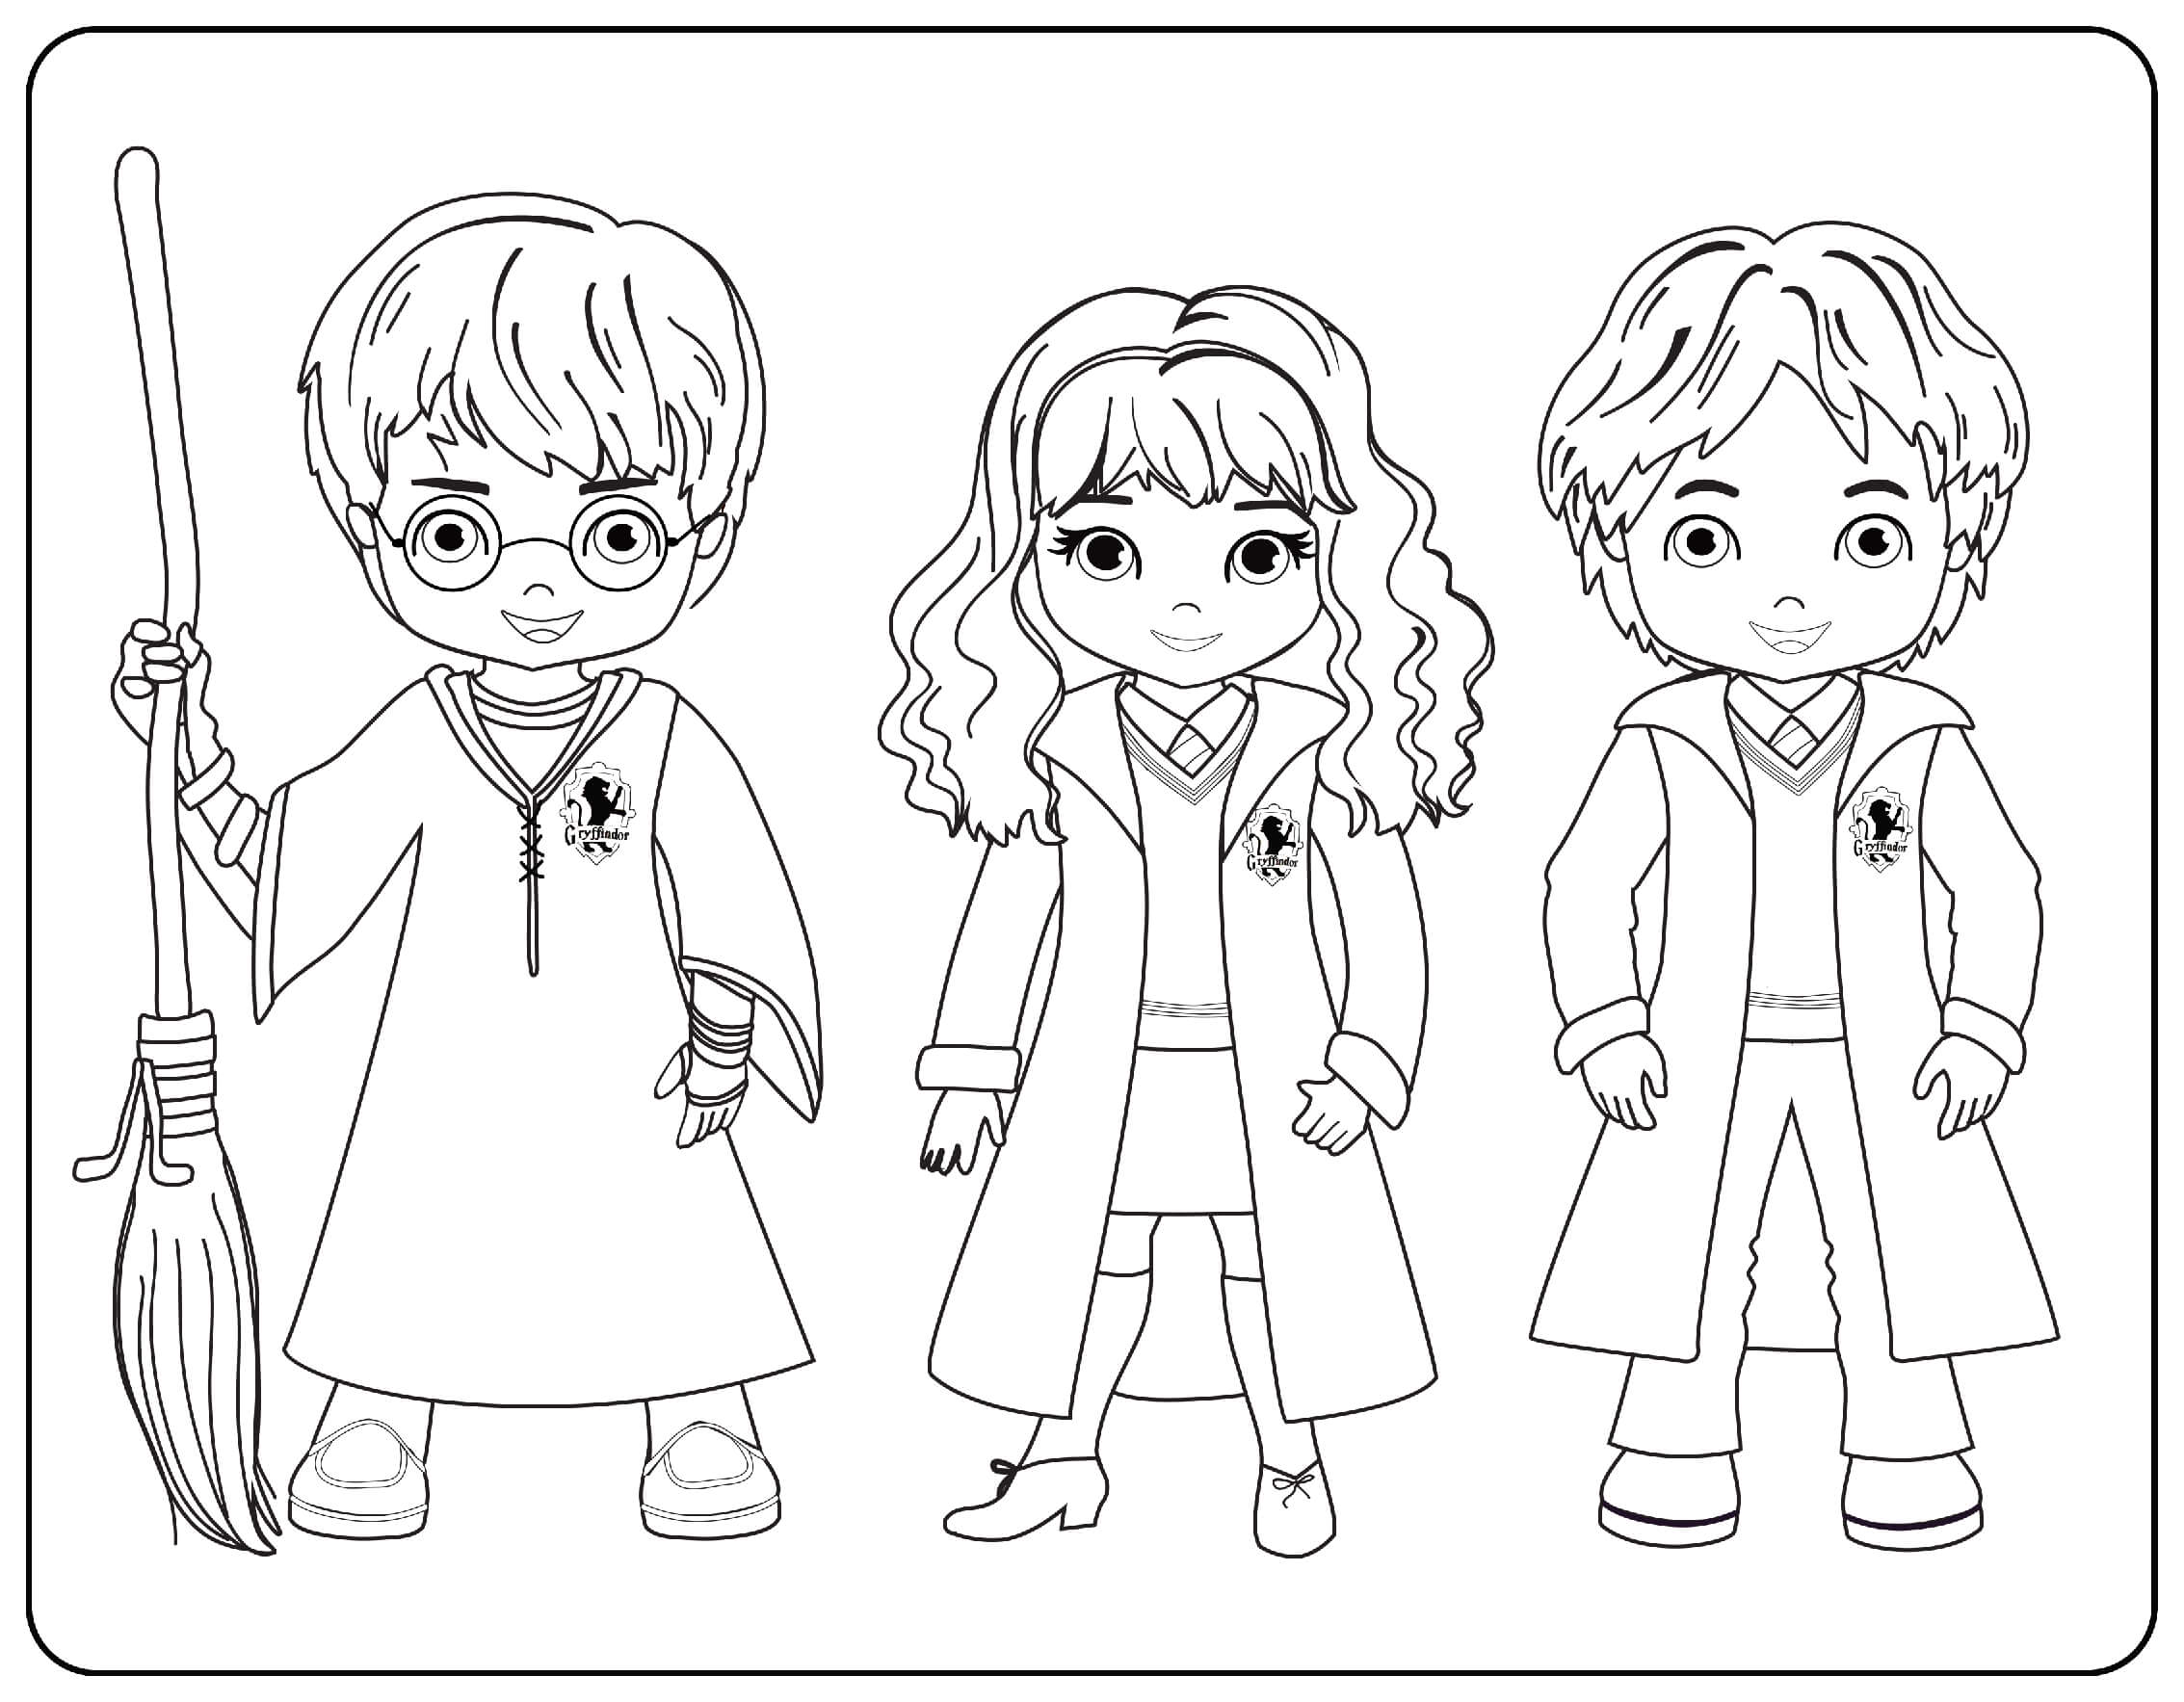 Harry Hermione And Ron Coloring Pages.